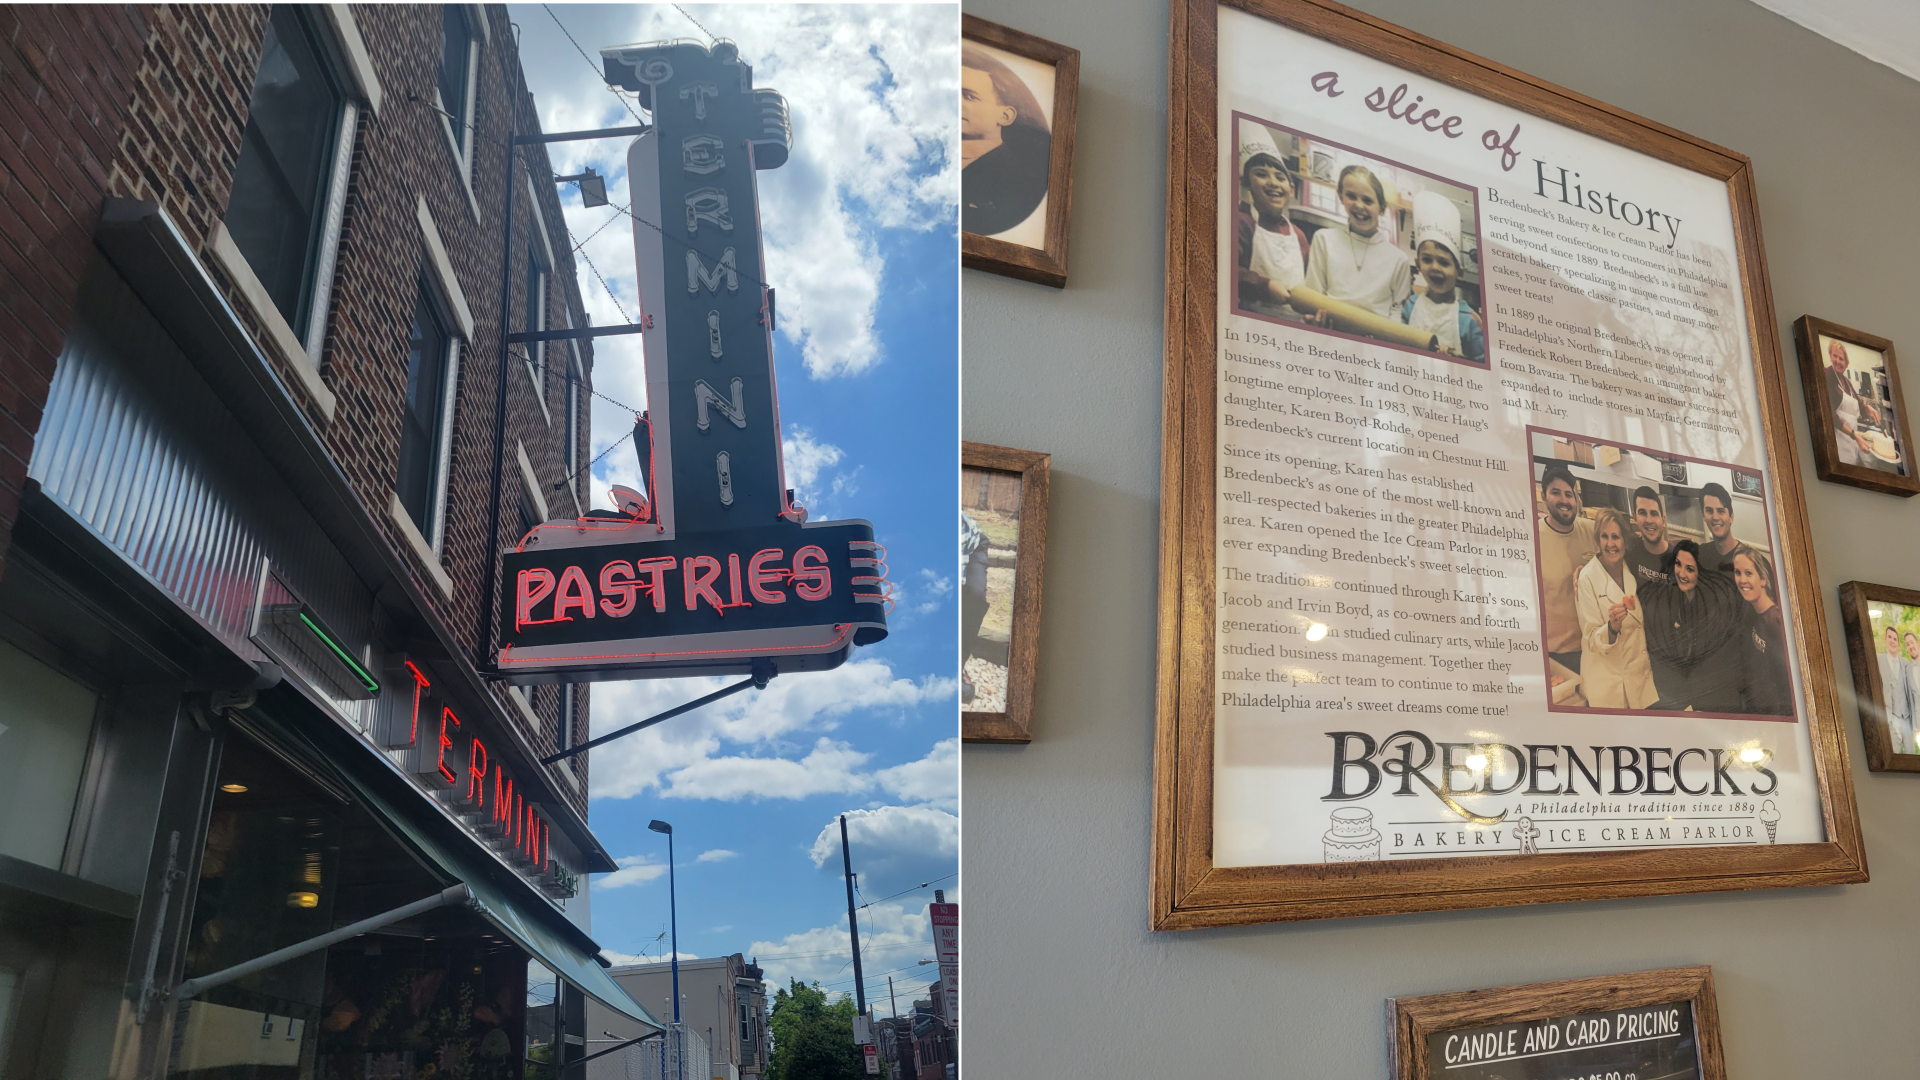 The outside of Termini Brothers in Philly; a frame photo with the family story inside Bredenbeck's Bakery.